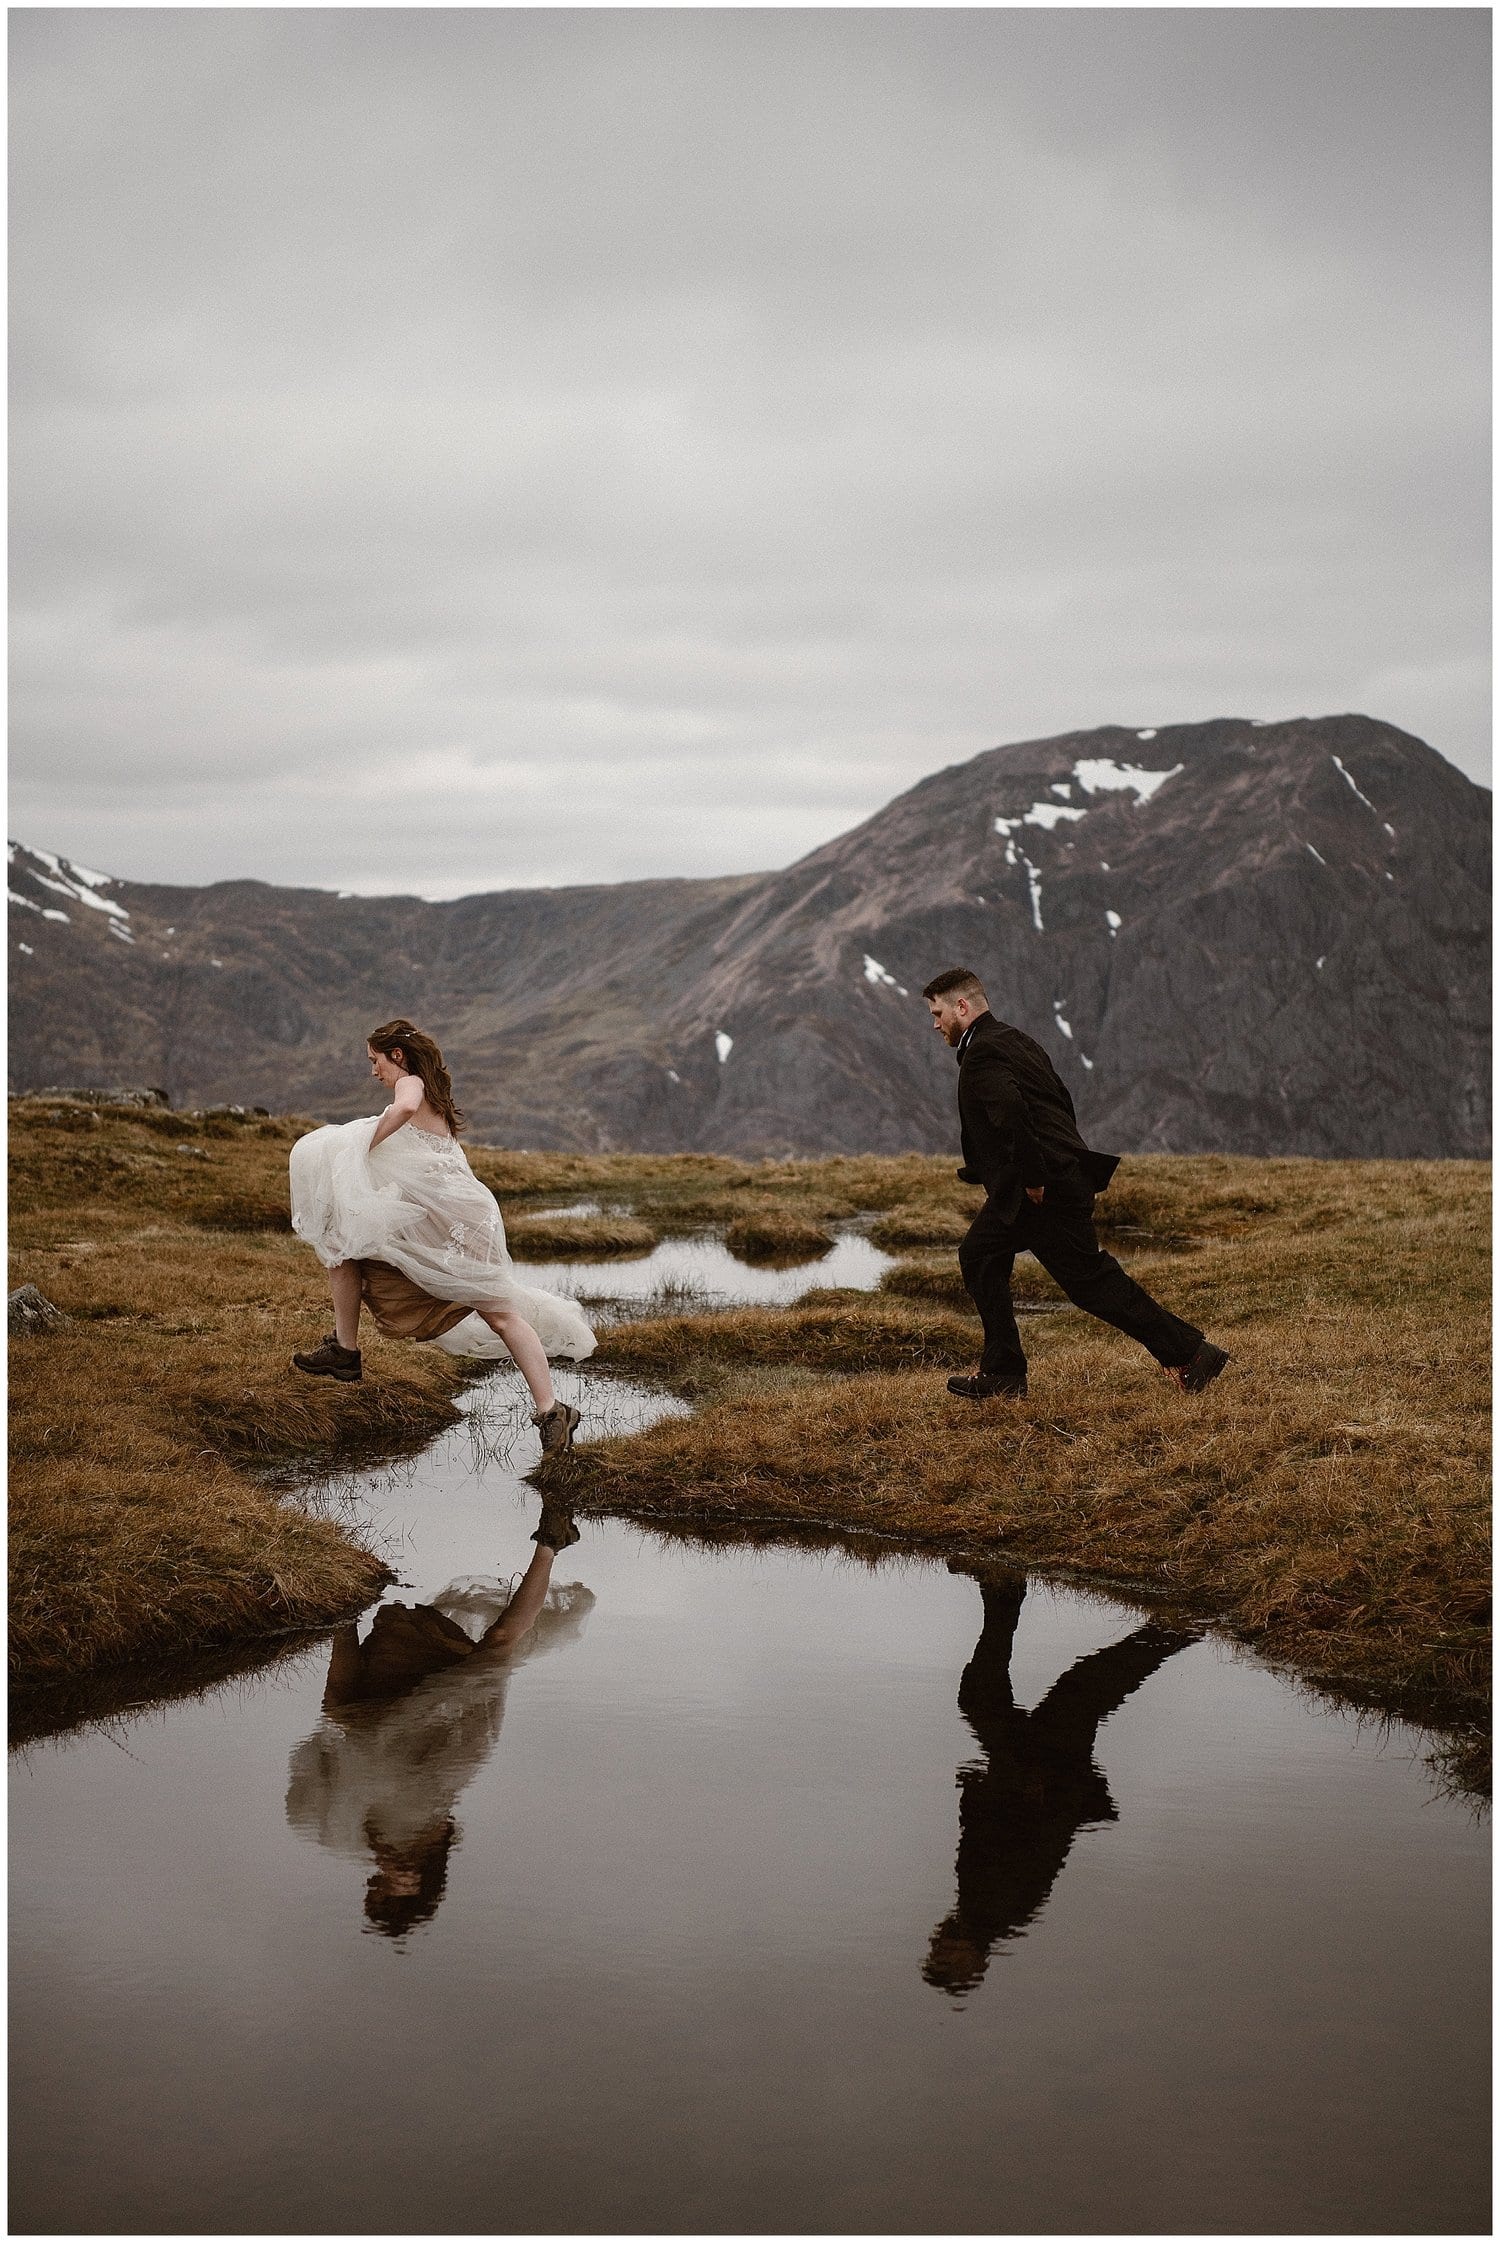 Bride and groom run, as bride leaps across puddle with mountains in background. 